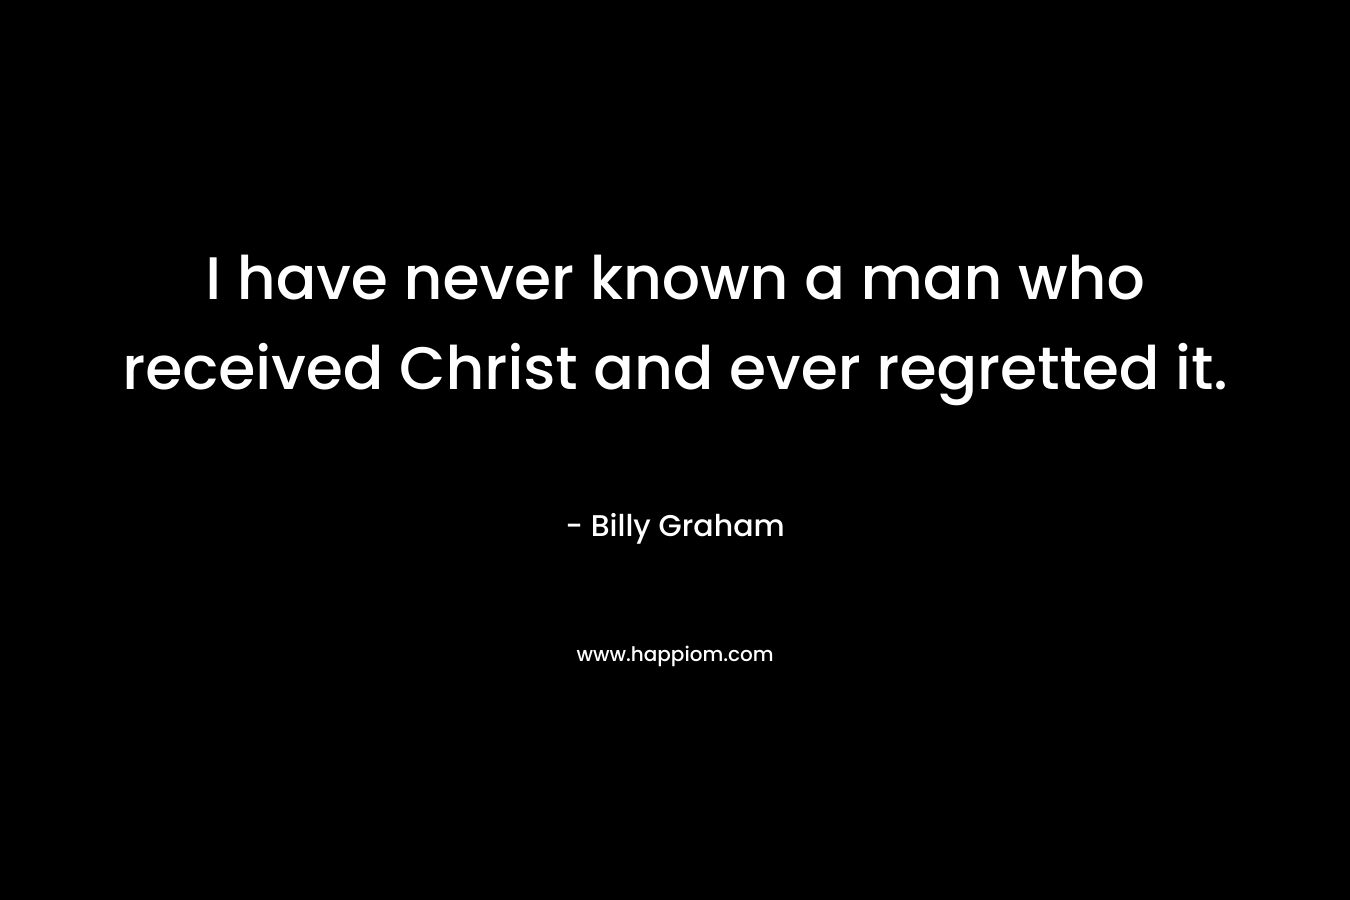 I have never known a man who received Christ and ever regretted it.